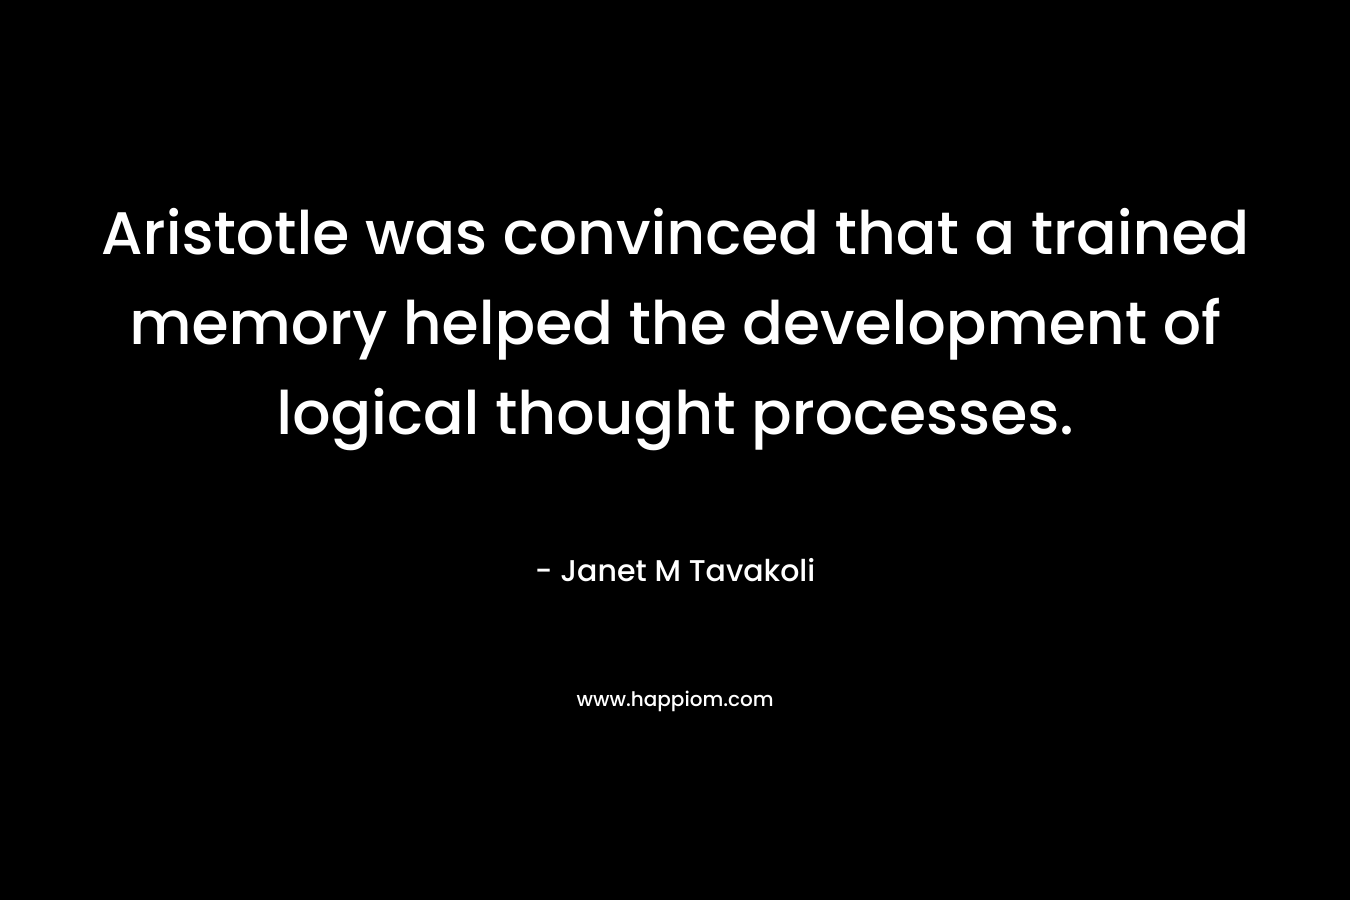 Aristotle was convinced that a trained memory helped the development of logical thought processes. – Janet M Tavakoli